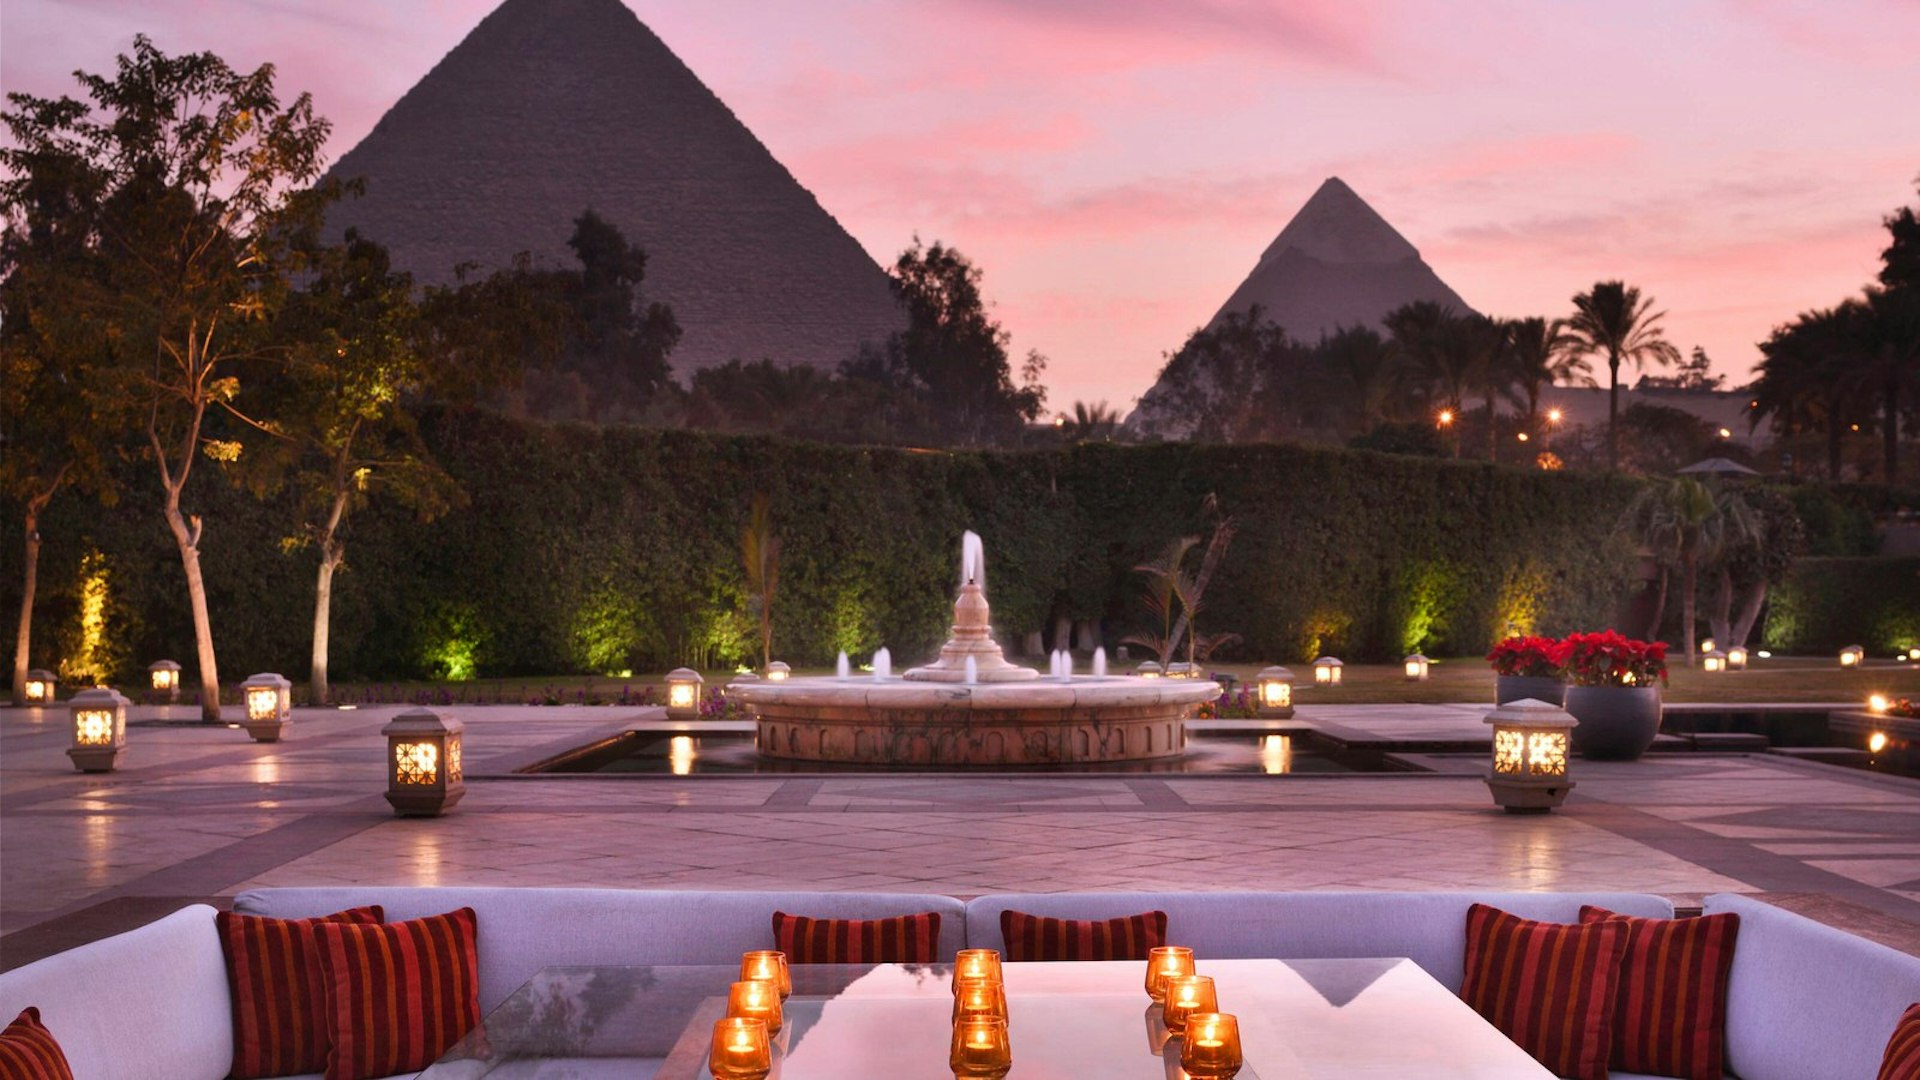 View of the Pyramids of Giza from the bar at Mena House Hotel, Giza, Cairo, Egypt